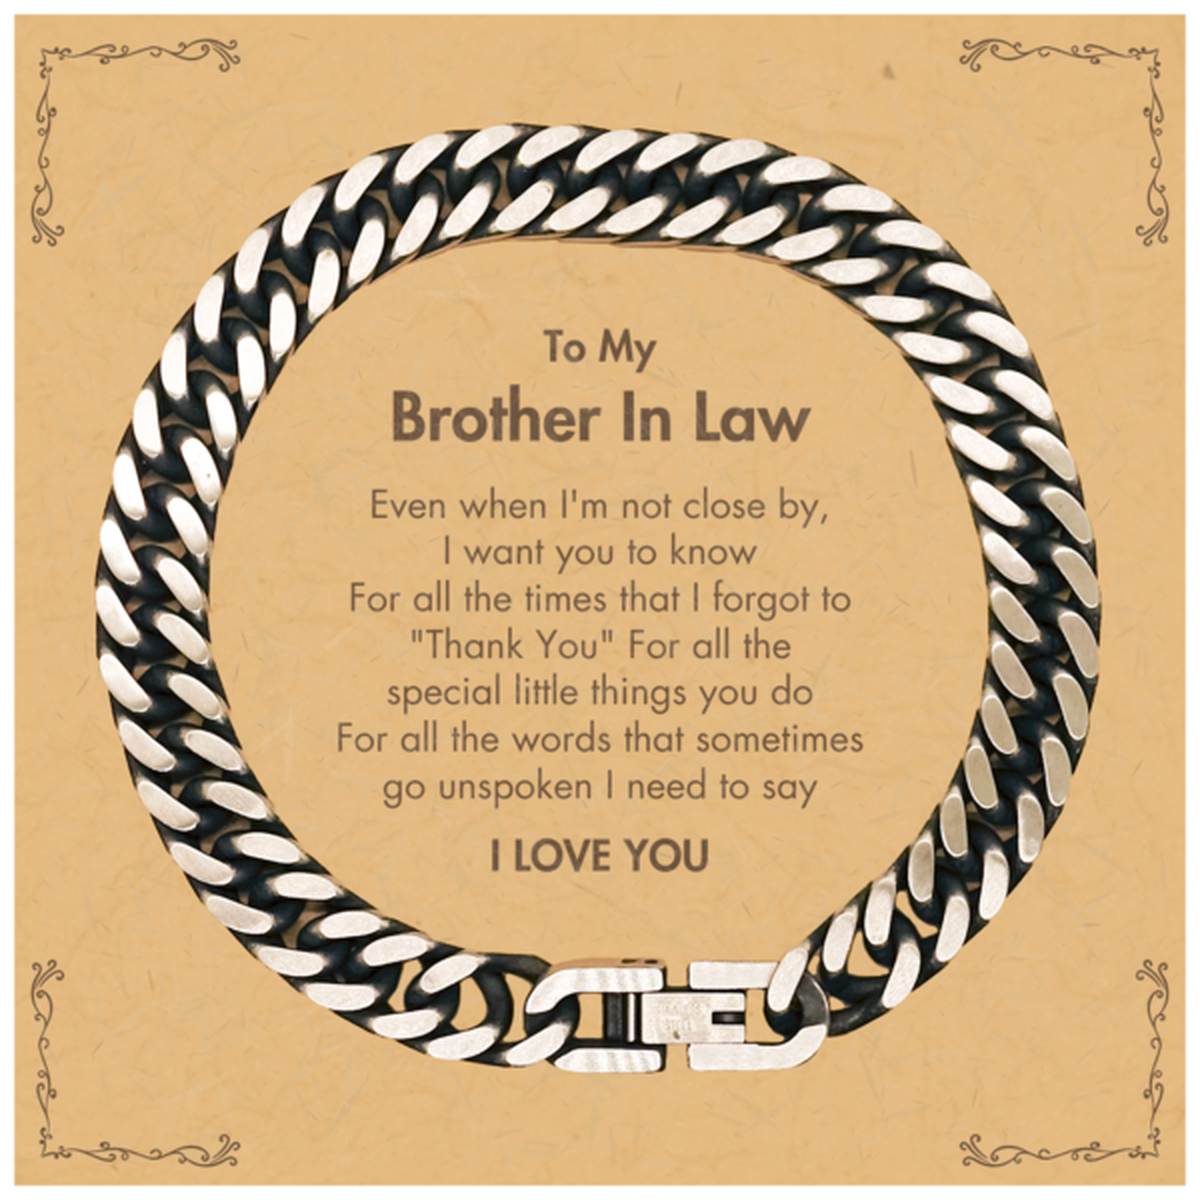 Thank You Gifts for Brother In Law, Keepsake Cuban Link Chain Bracelet Gifts for Brother In Law Birthday Mother's day Father's Day Brother In Law For all the words That sometimes go unspoken I need to say I LOVE YOU